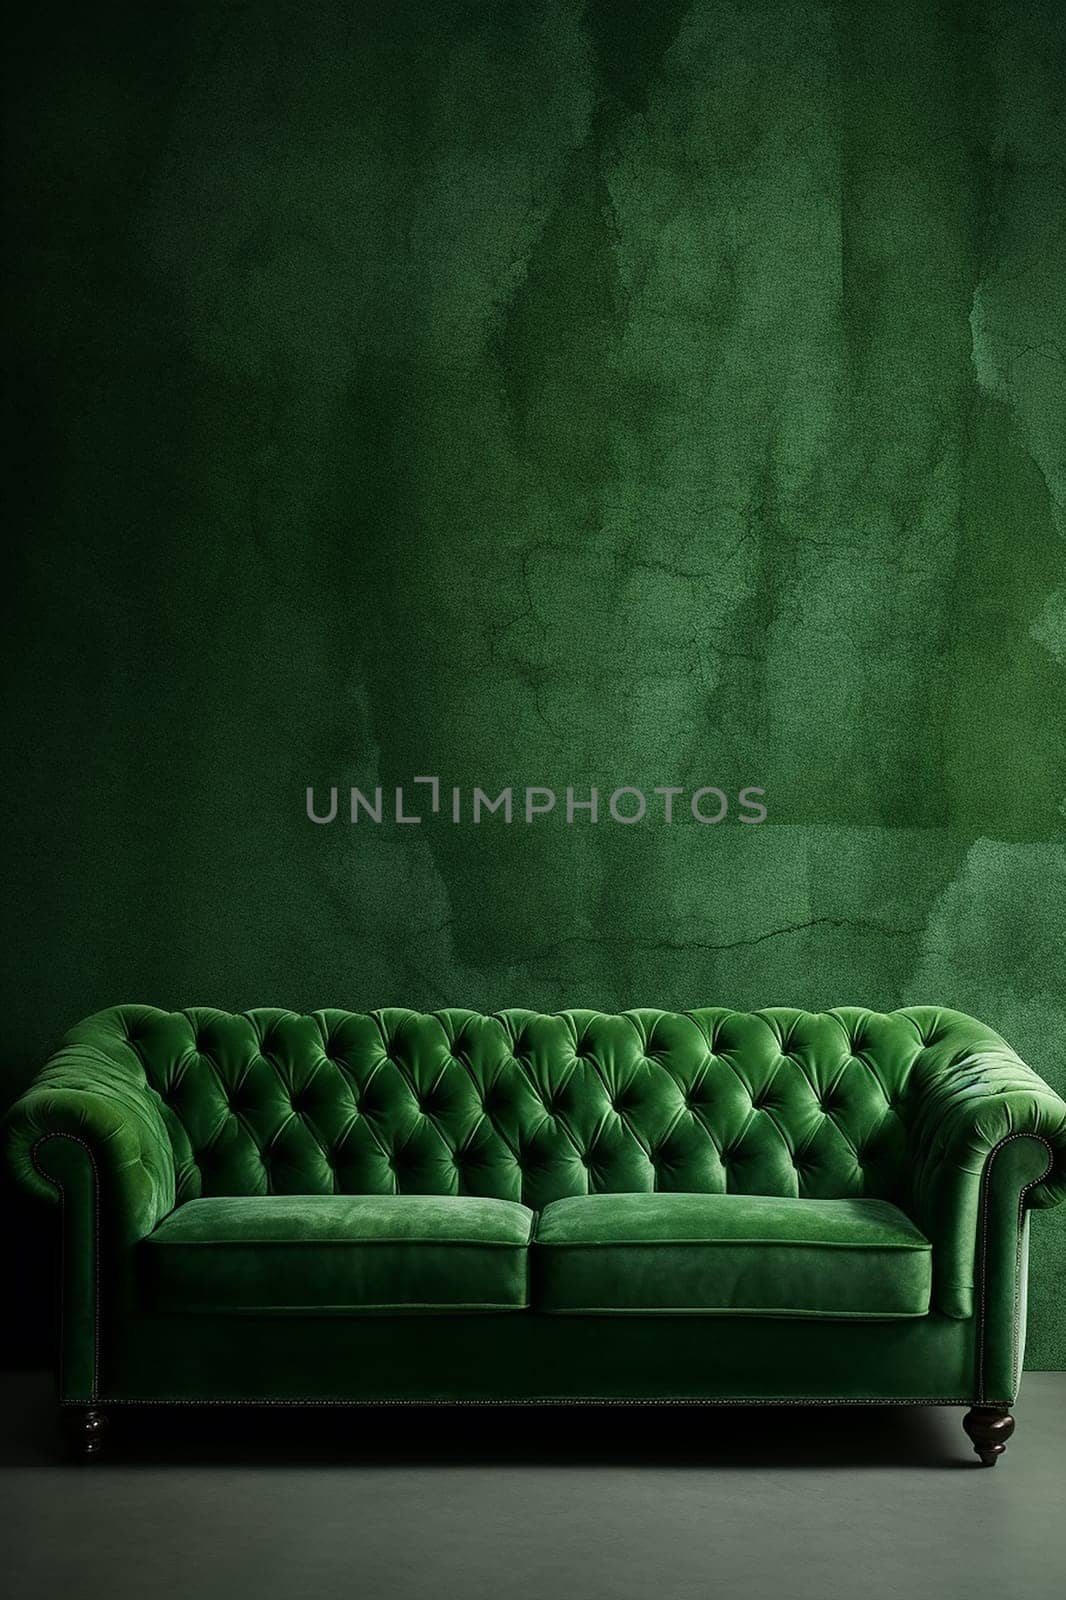 Elegant luxury green velvet sofa in a waiting room against a textured green wall by Hype2art